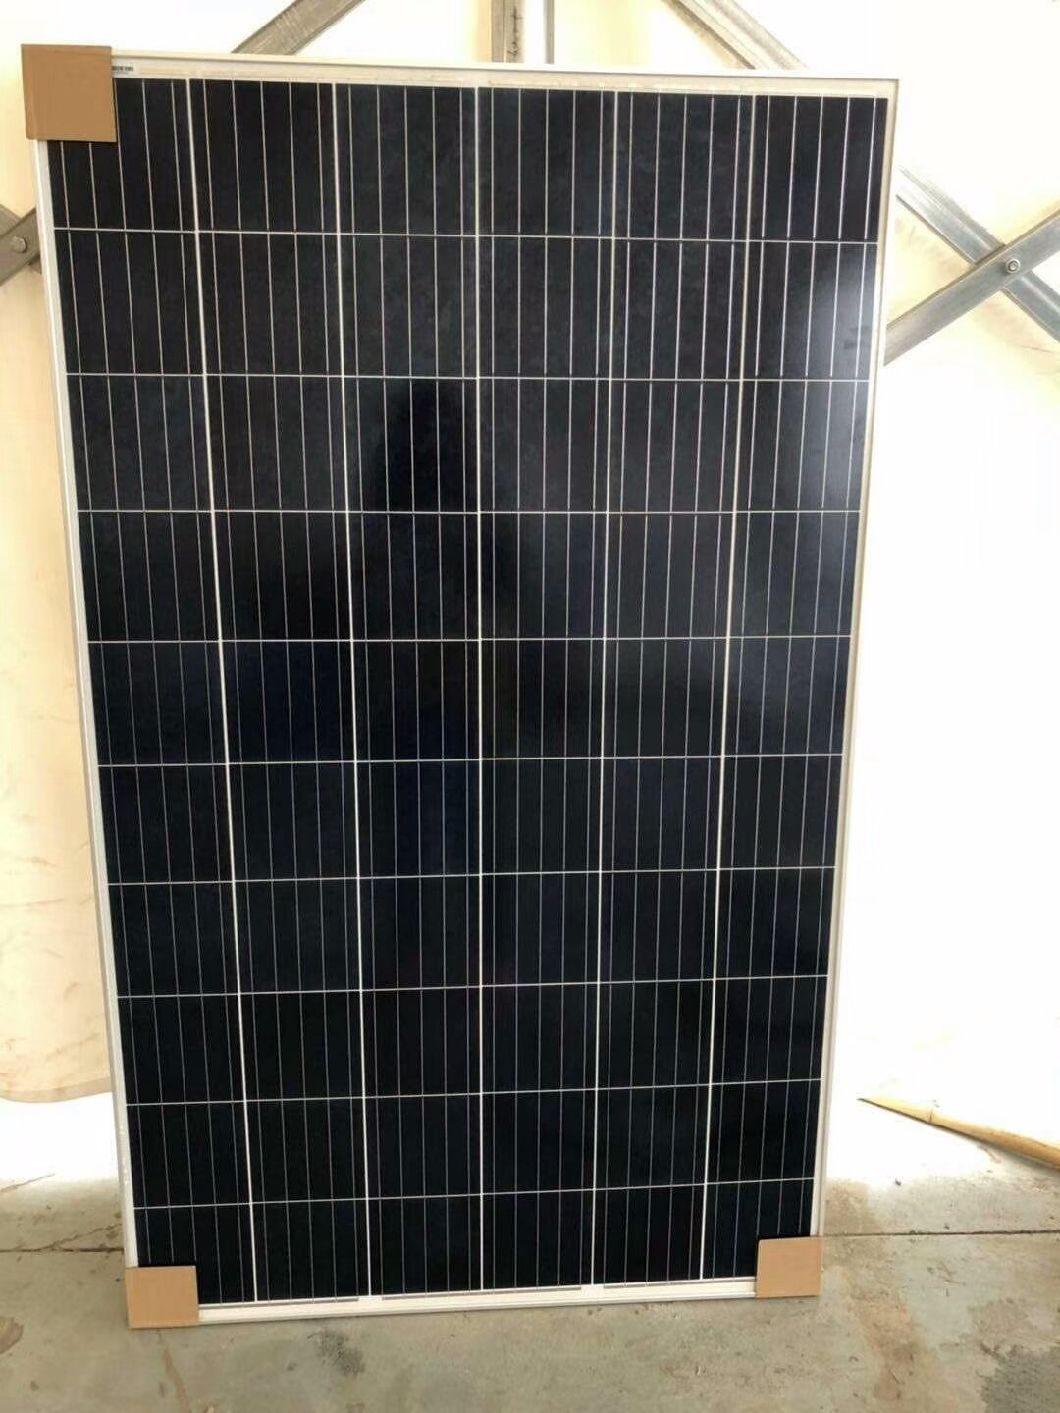 Chinese Suppliers Solar Cells, Solar Panel for Poly 200W 160W Solar Energy Panel Home Use